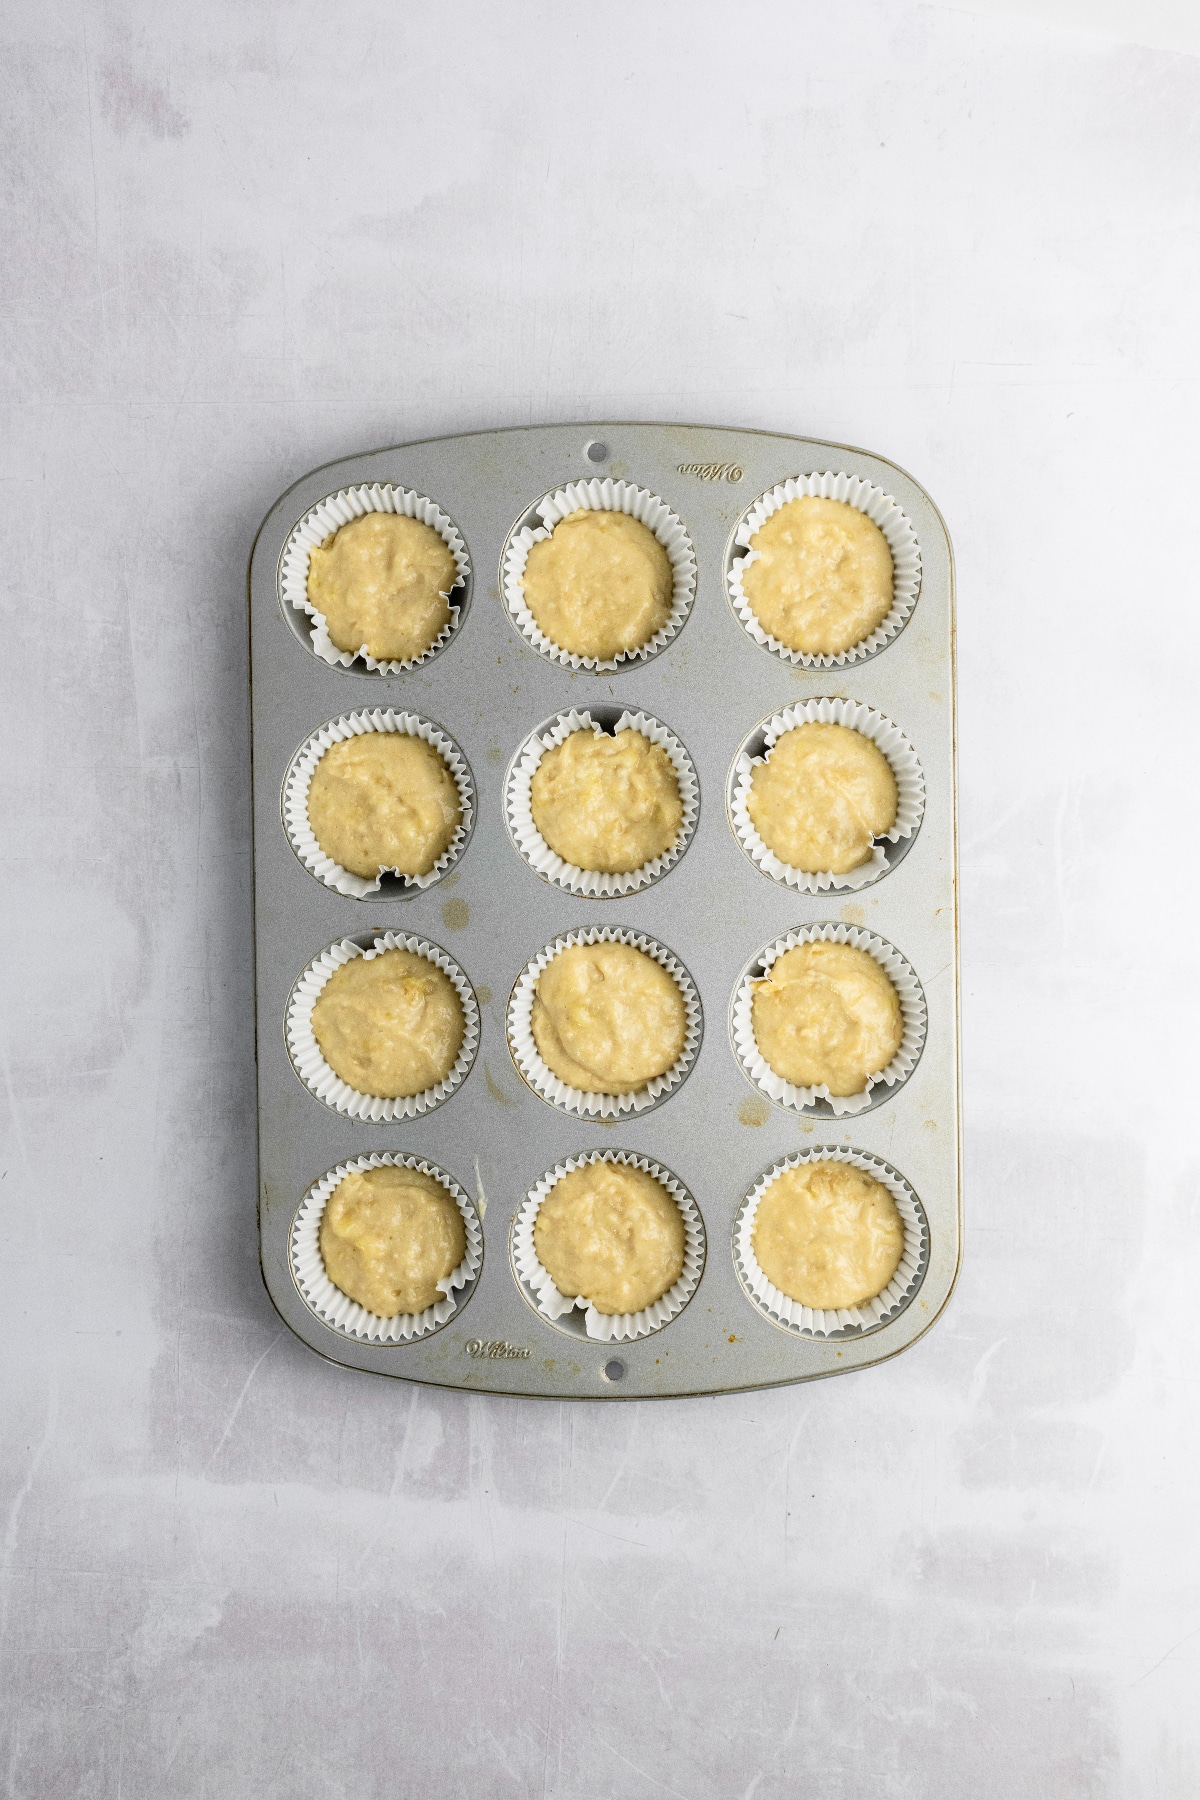 A 12 count muffin pan filled with cake batter.